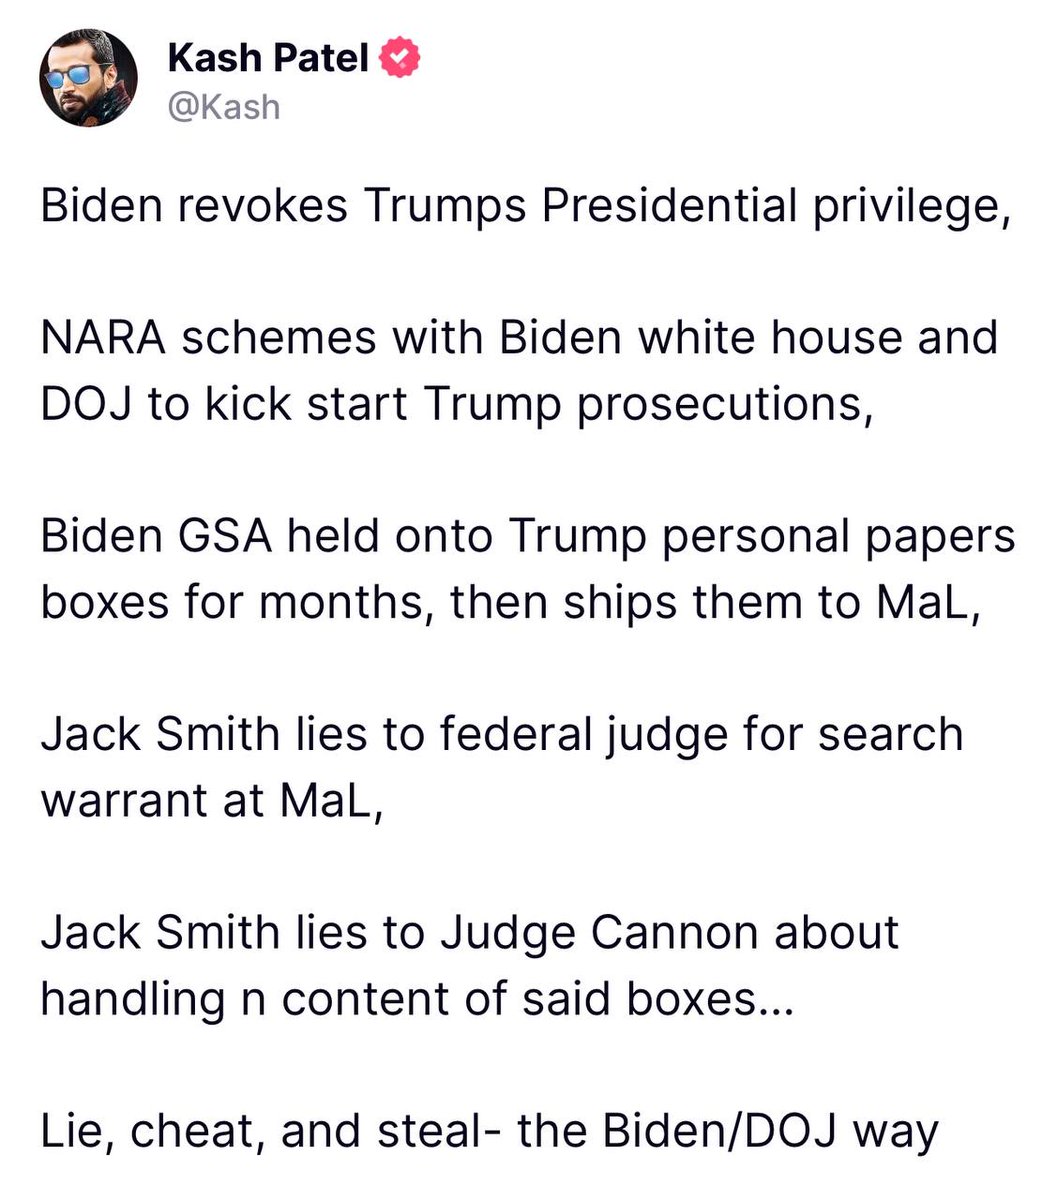 Biden should be indicted, not Trump. If Trump had done this to Obama, Congress would have gone mad. Just your daily corruption on this Good Tuesday.